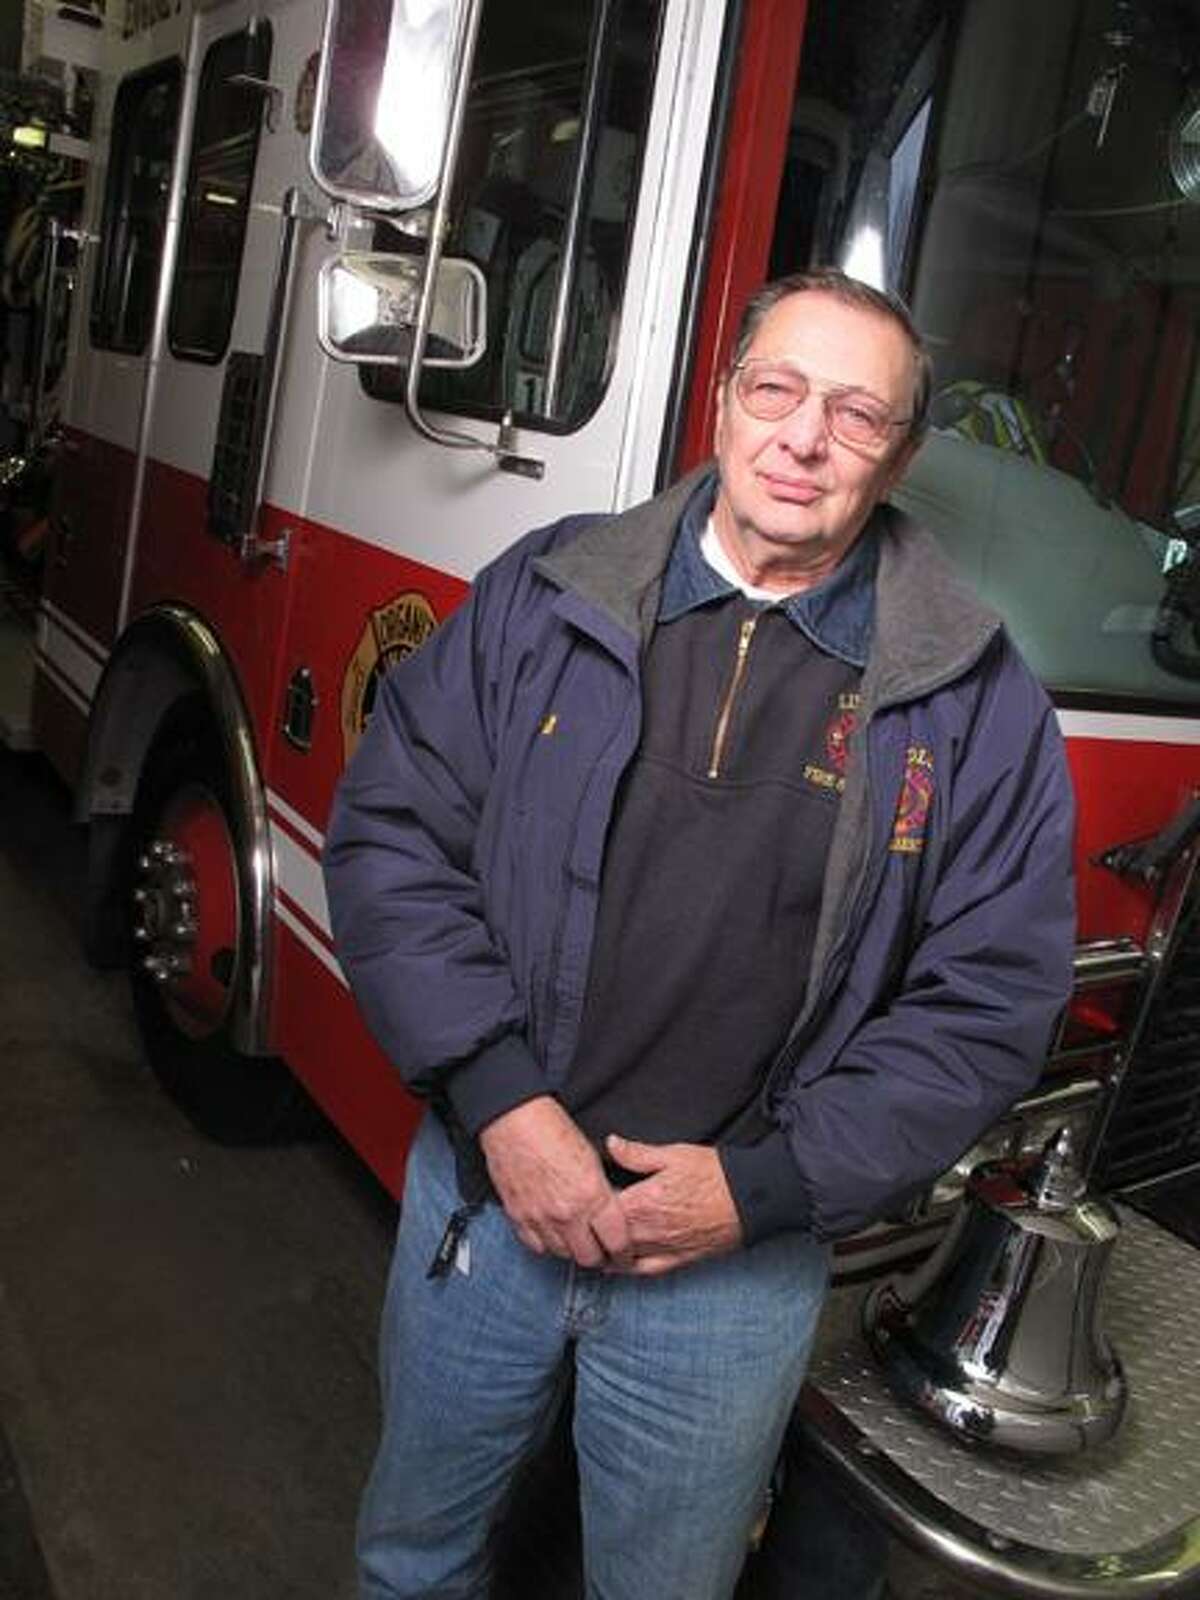 Dispatch Staff Photo by JOHN HAEGER (Twitter.com/OneidaPhoto)William Sweatman poses next to one of the Lincoln Fire Department trucks on Tuesday, Jan. 17, 2012 at the station in Lincoln.